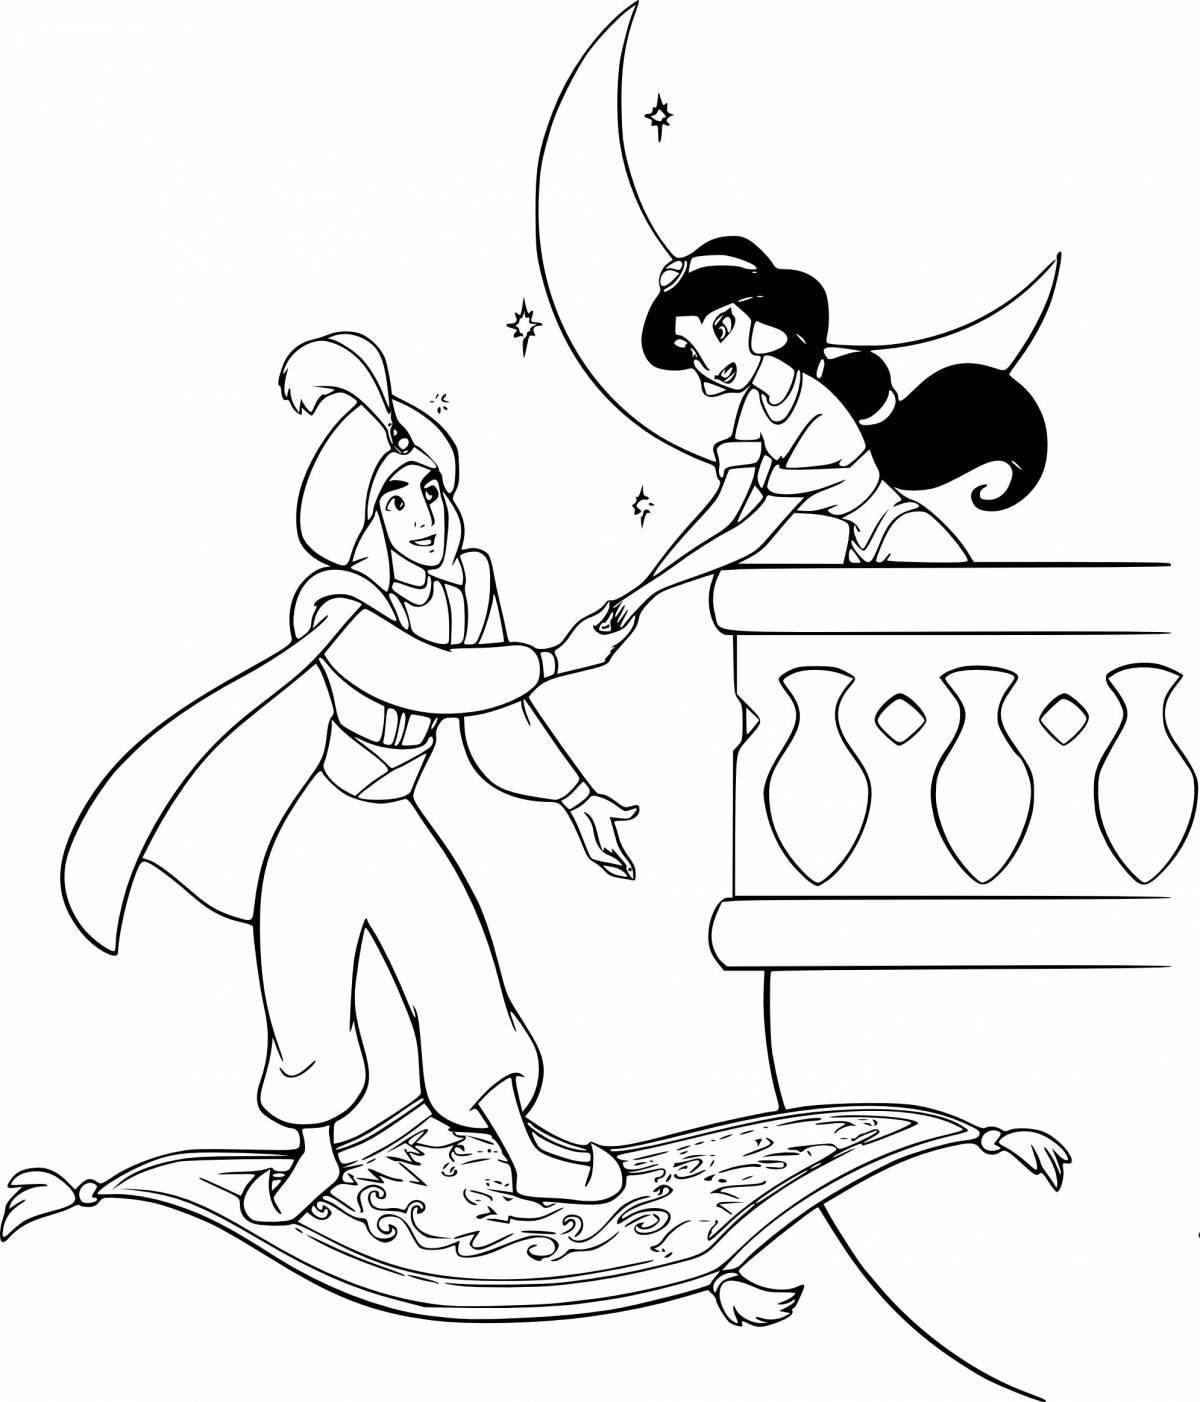 Aladdin exciting coloring book